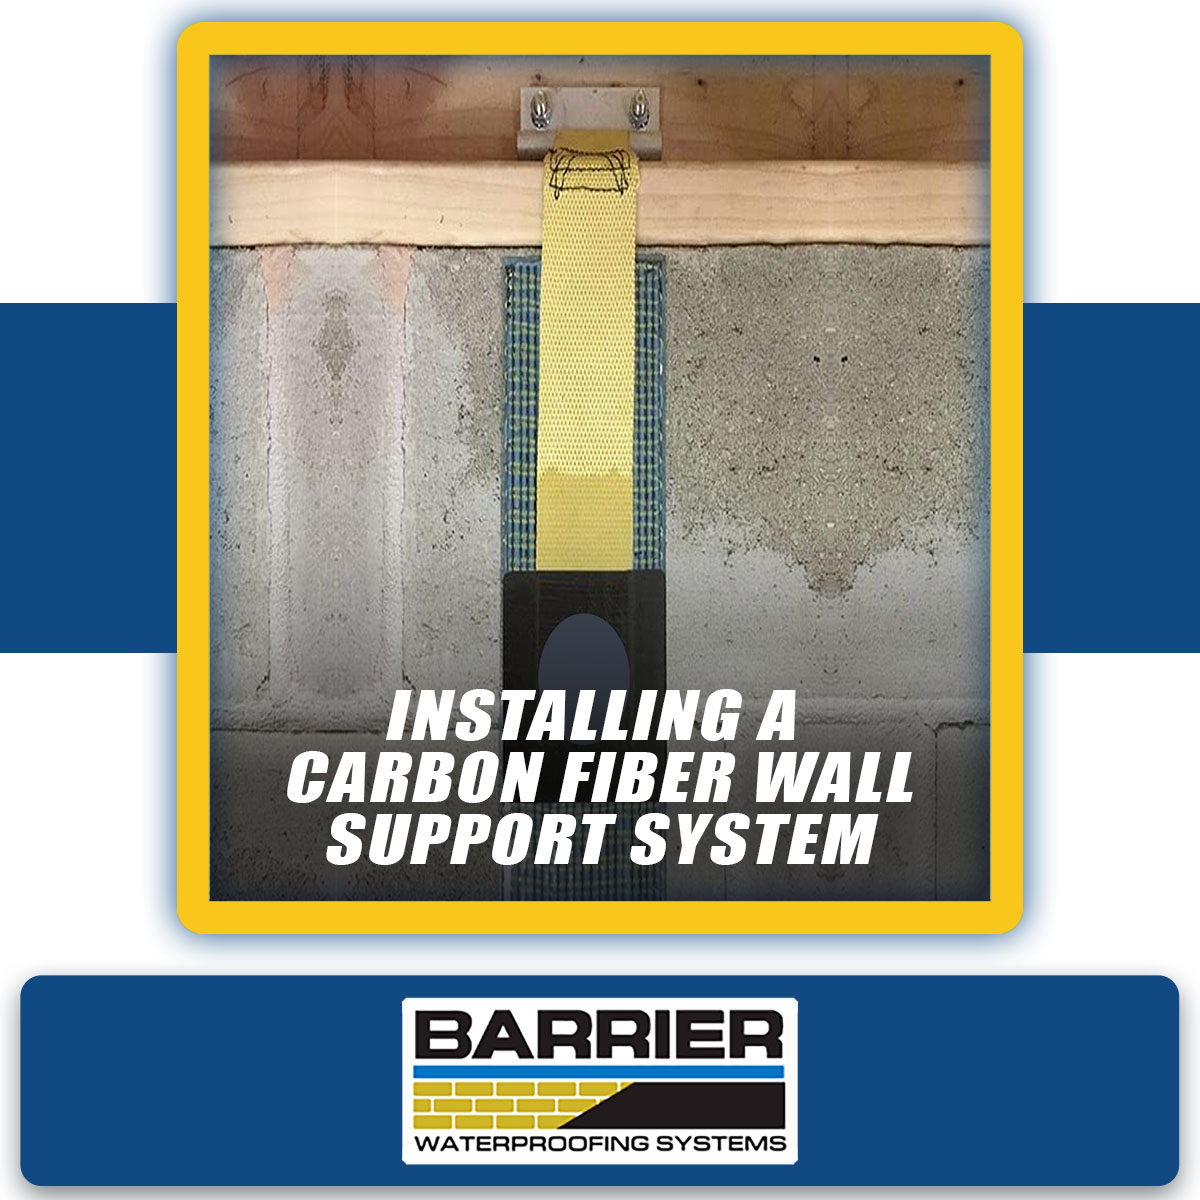 Photo of a FORTRESS carbon fiber wall support system